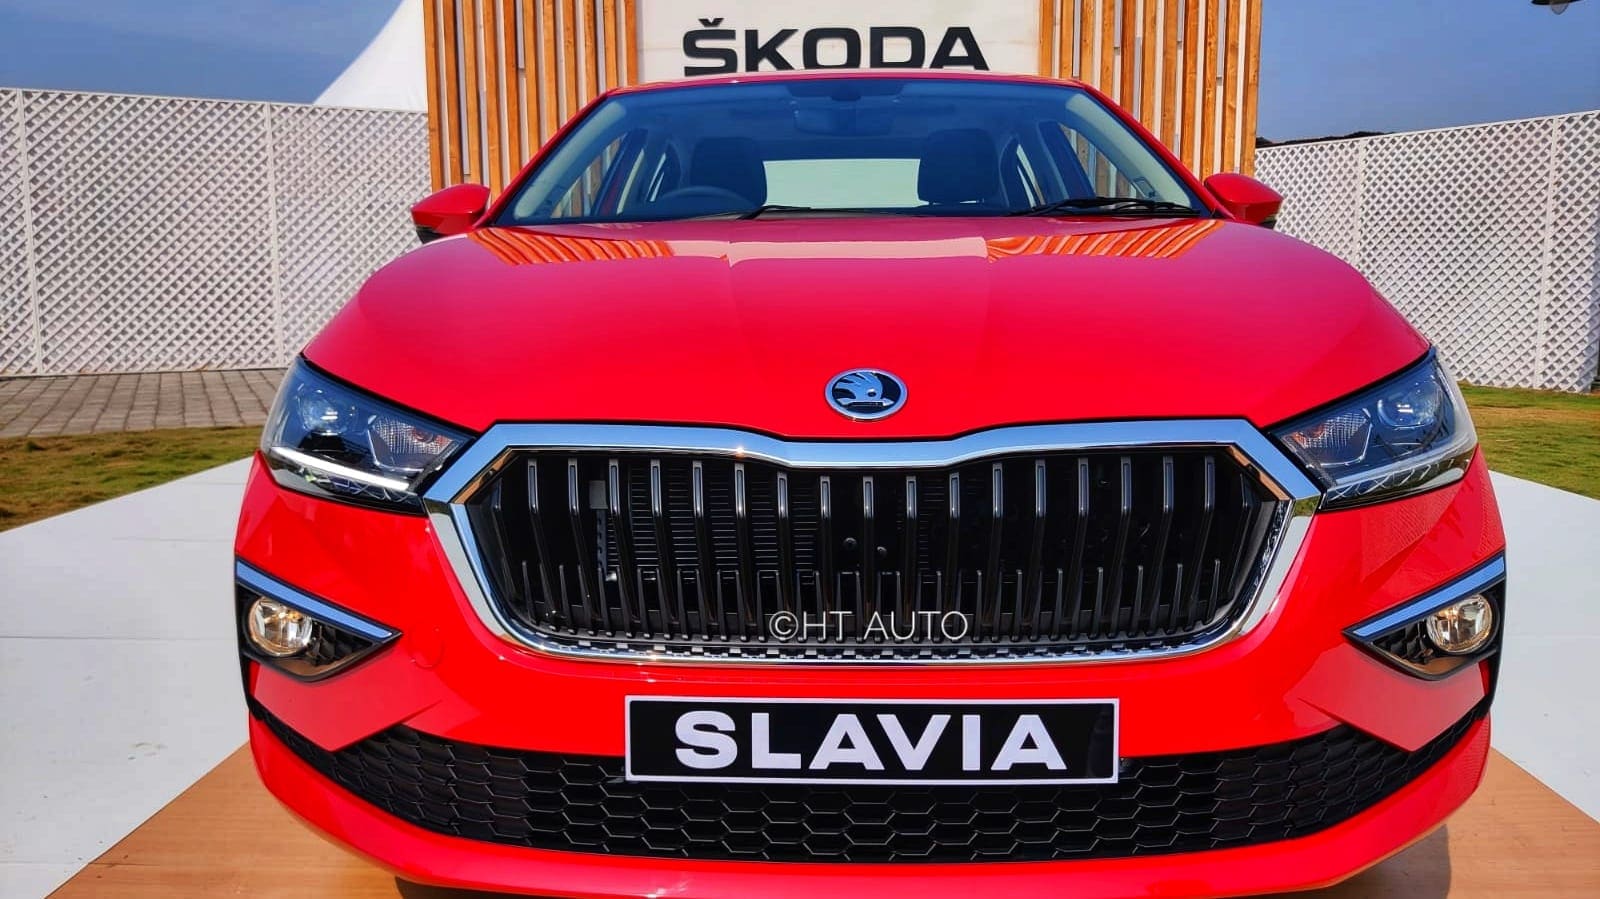 Slavia from Skoda has a very European exterior styling with modern elements insterspaced.